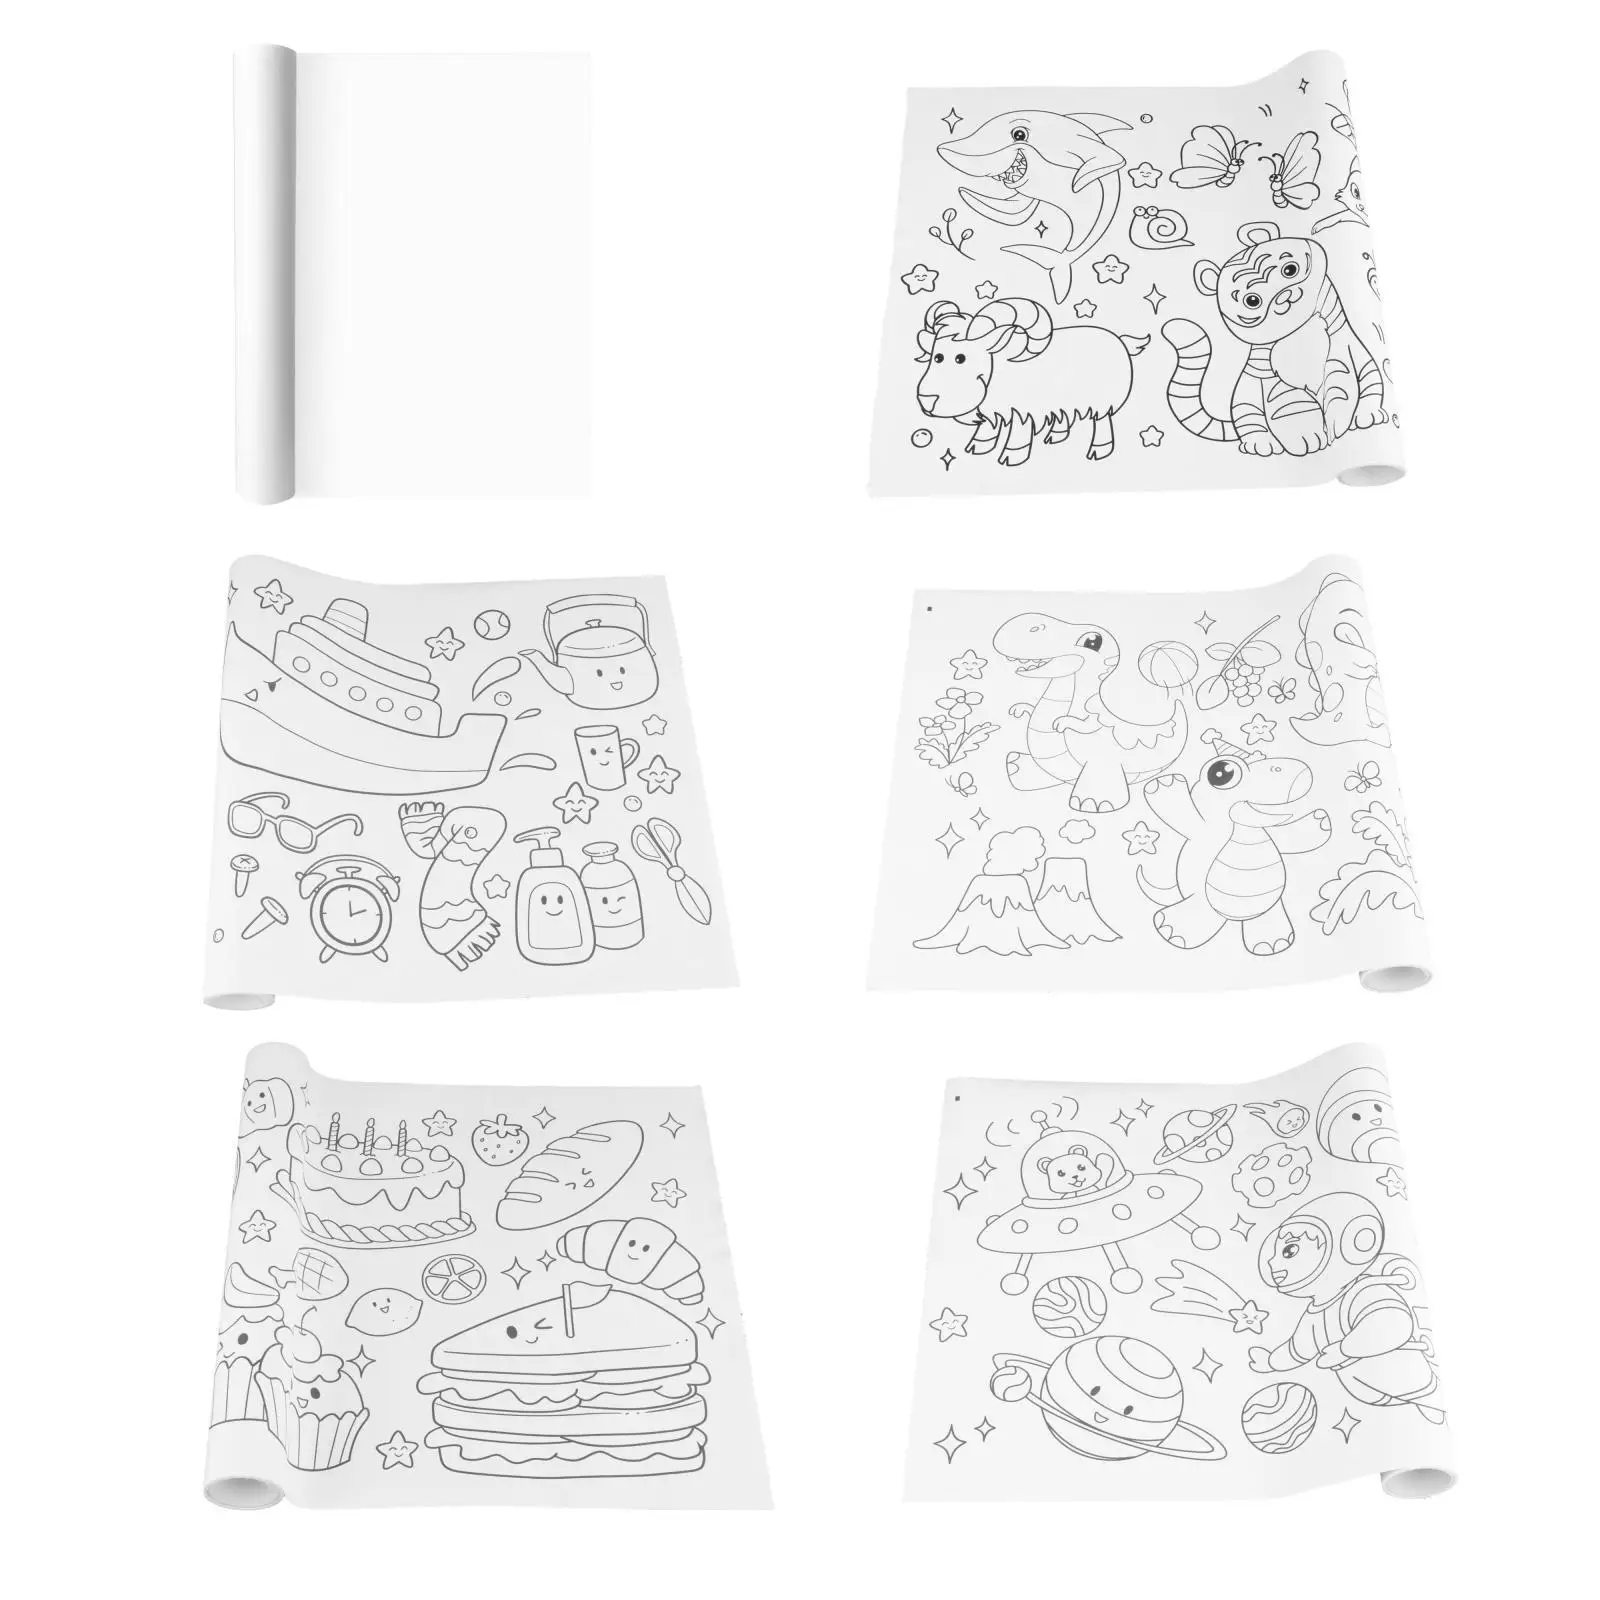 Childrens Drawing Roll Paper for Kids Painting Drawing Color for Crafting Imagination Creativity Kids Boys Girls